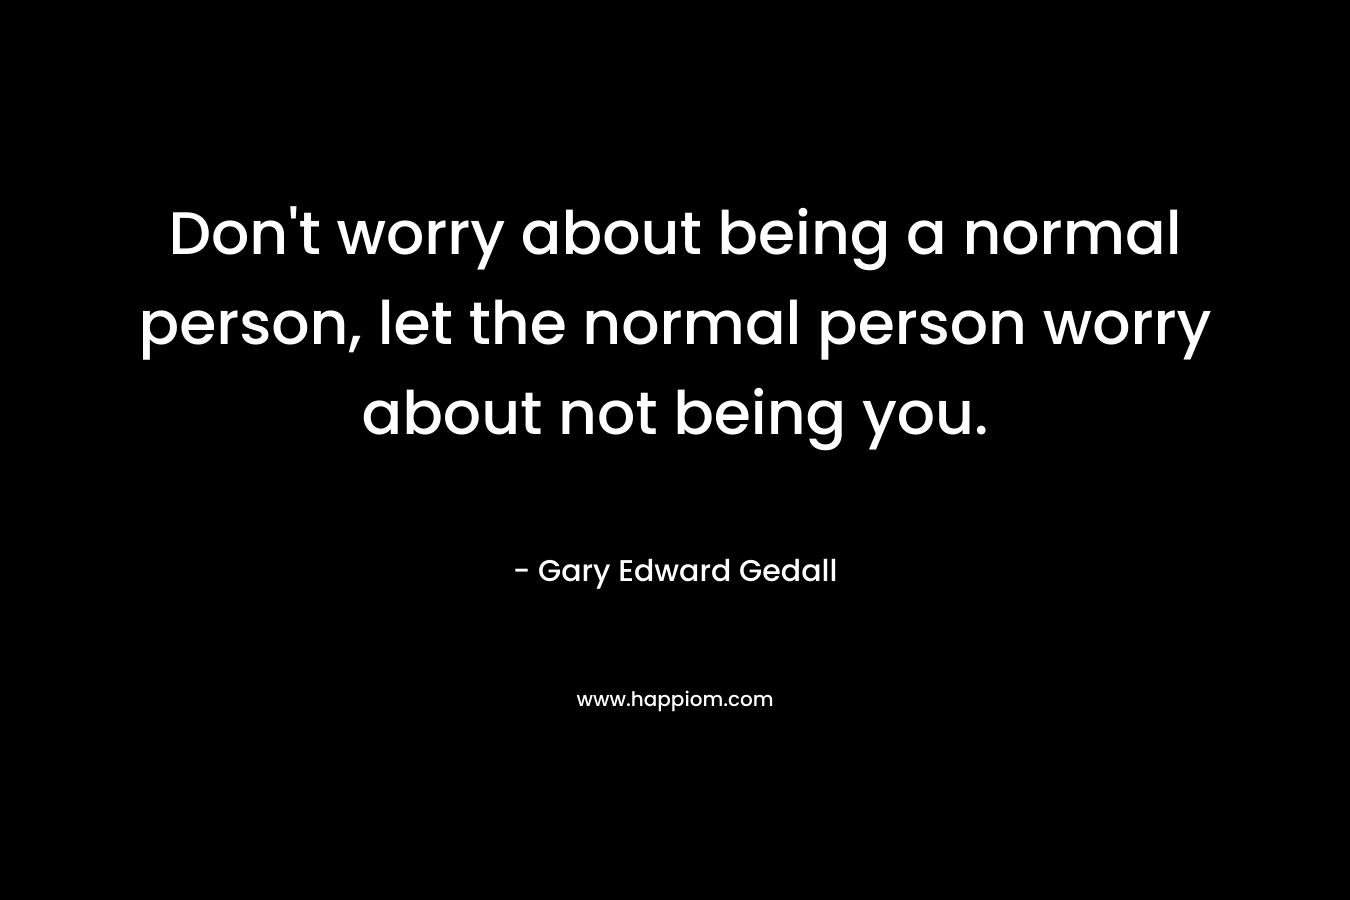 Don't worry about being a normal person, let the normal person worry about not being you.